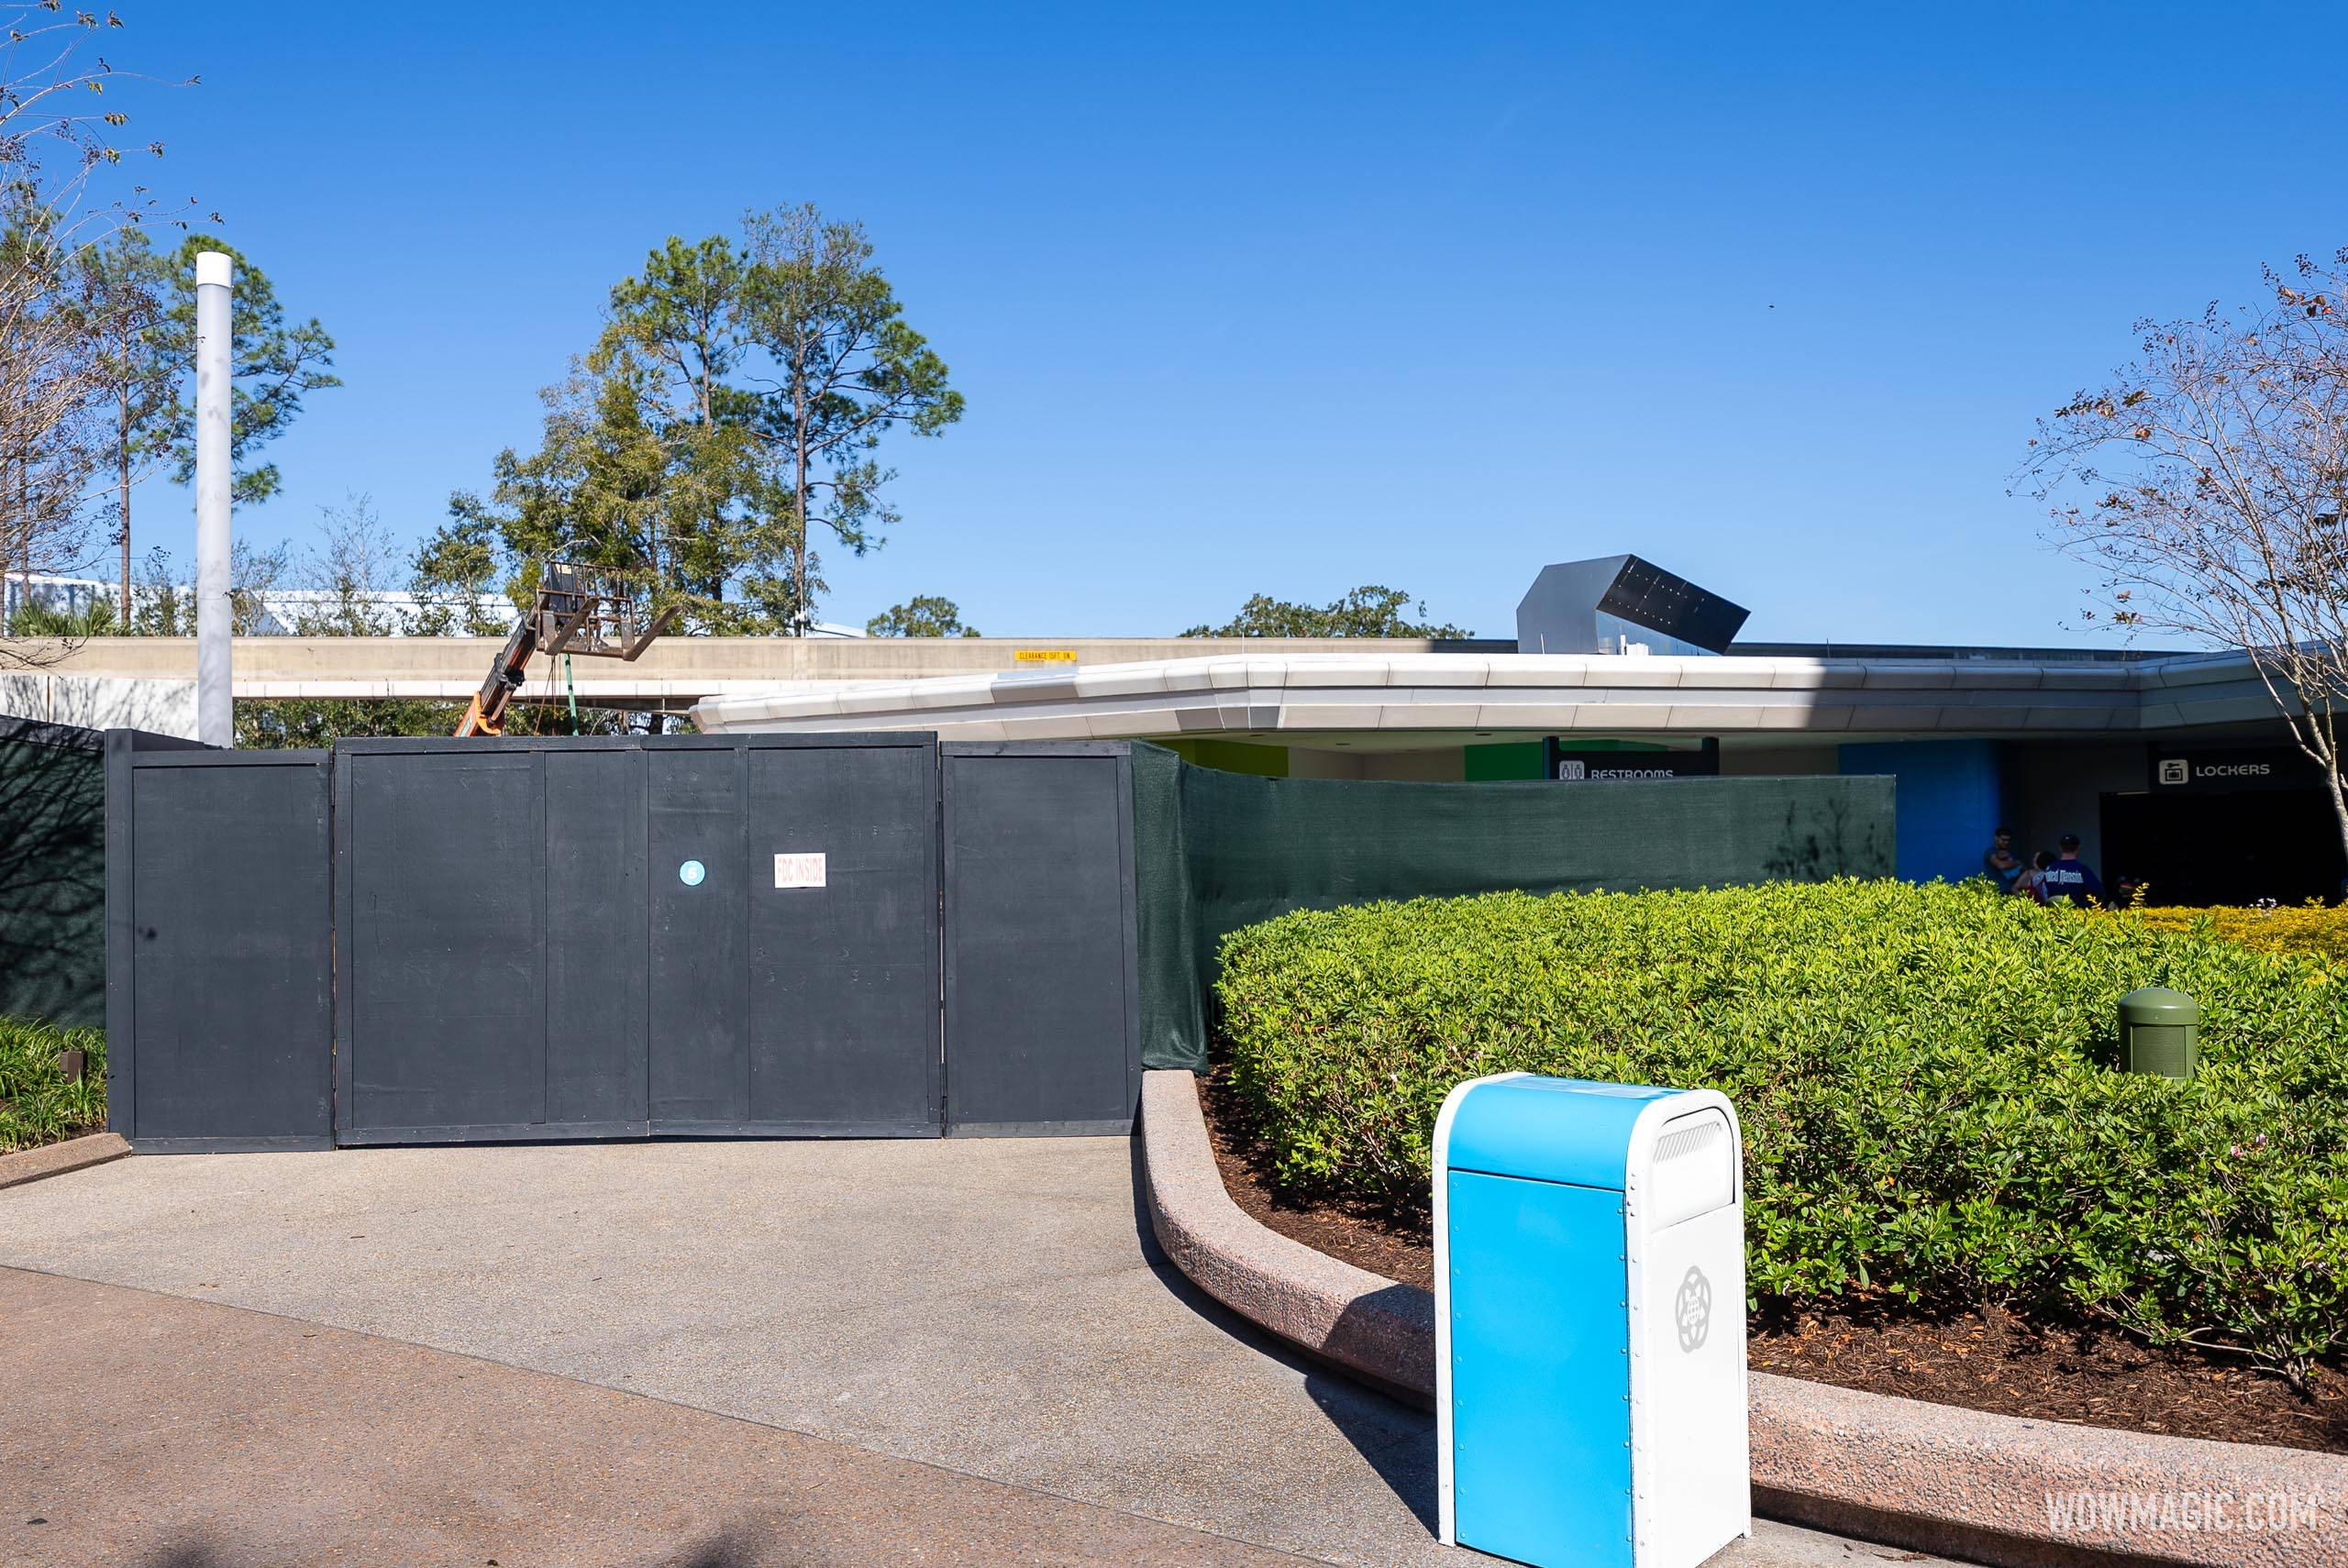 New backstage gate at former EPCOT Future World bypass